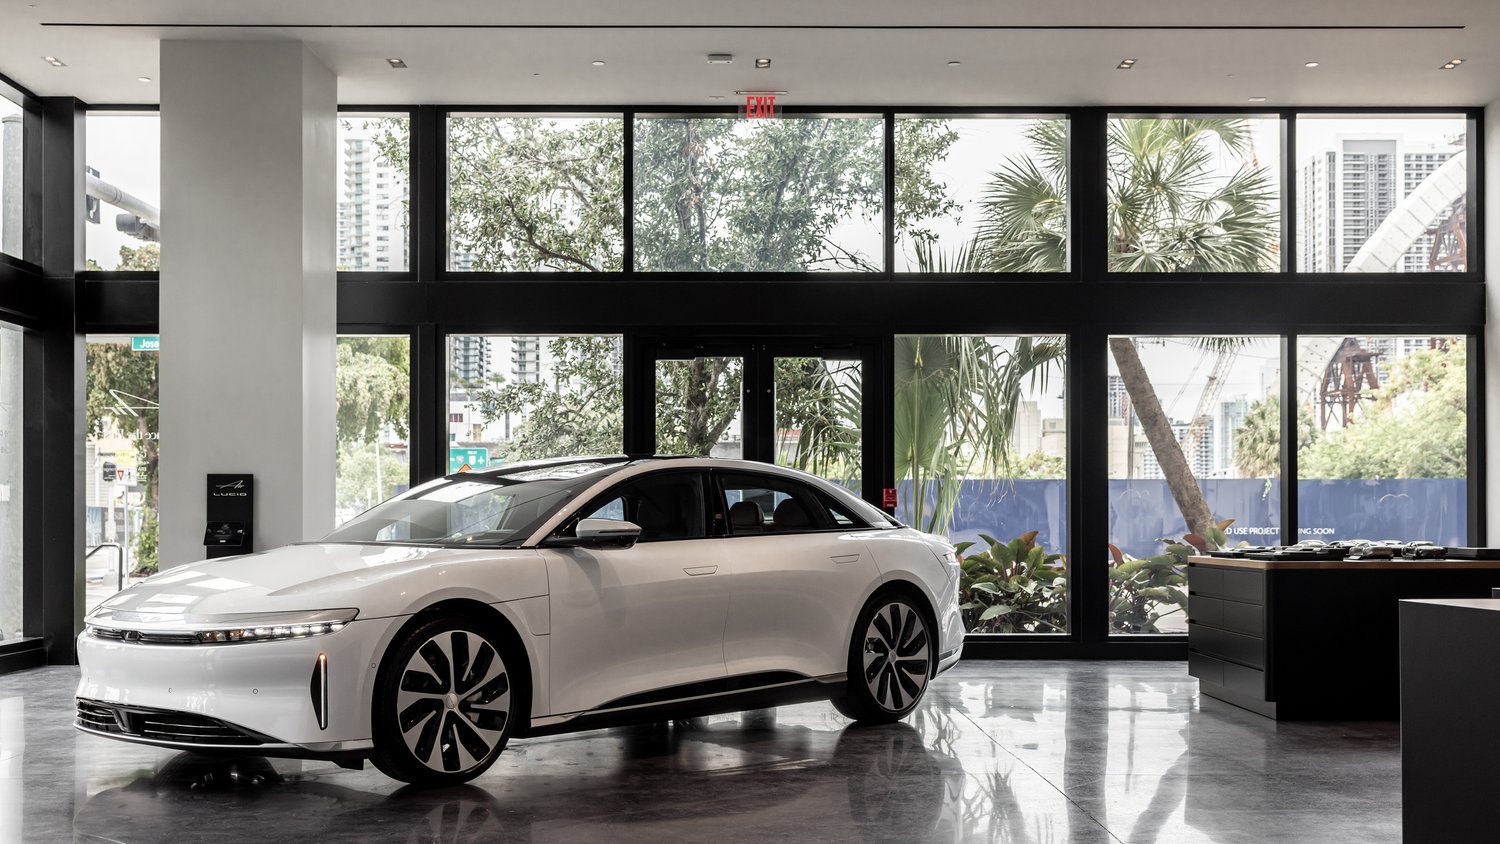 Lucid Motors/Apple store in Brickell Miami 👀👀 Neither party has denied  the partnership rumors, Lucid hired a top Apple Exec, Apple has openly  talked about entering the EV market, and their recent